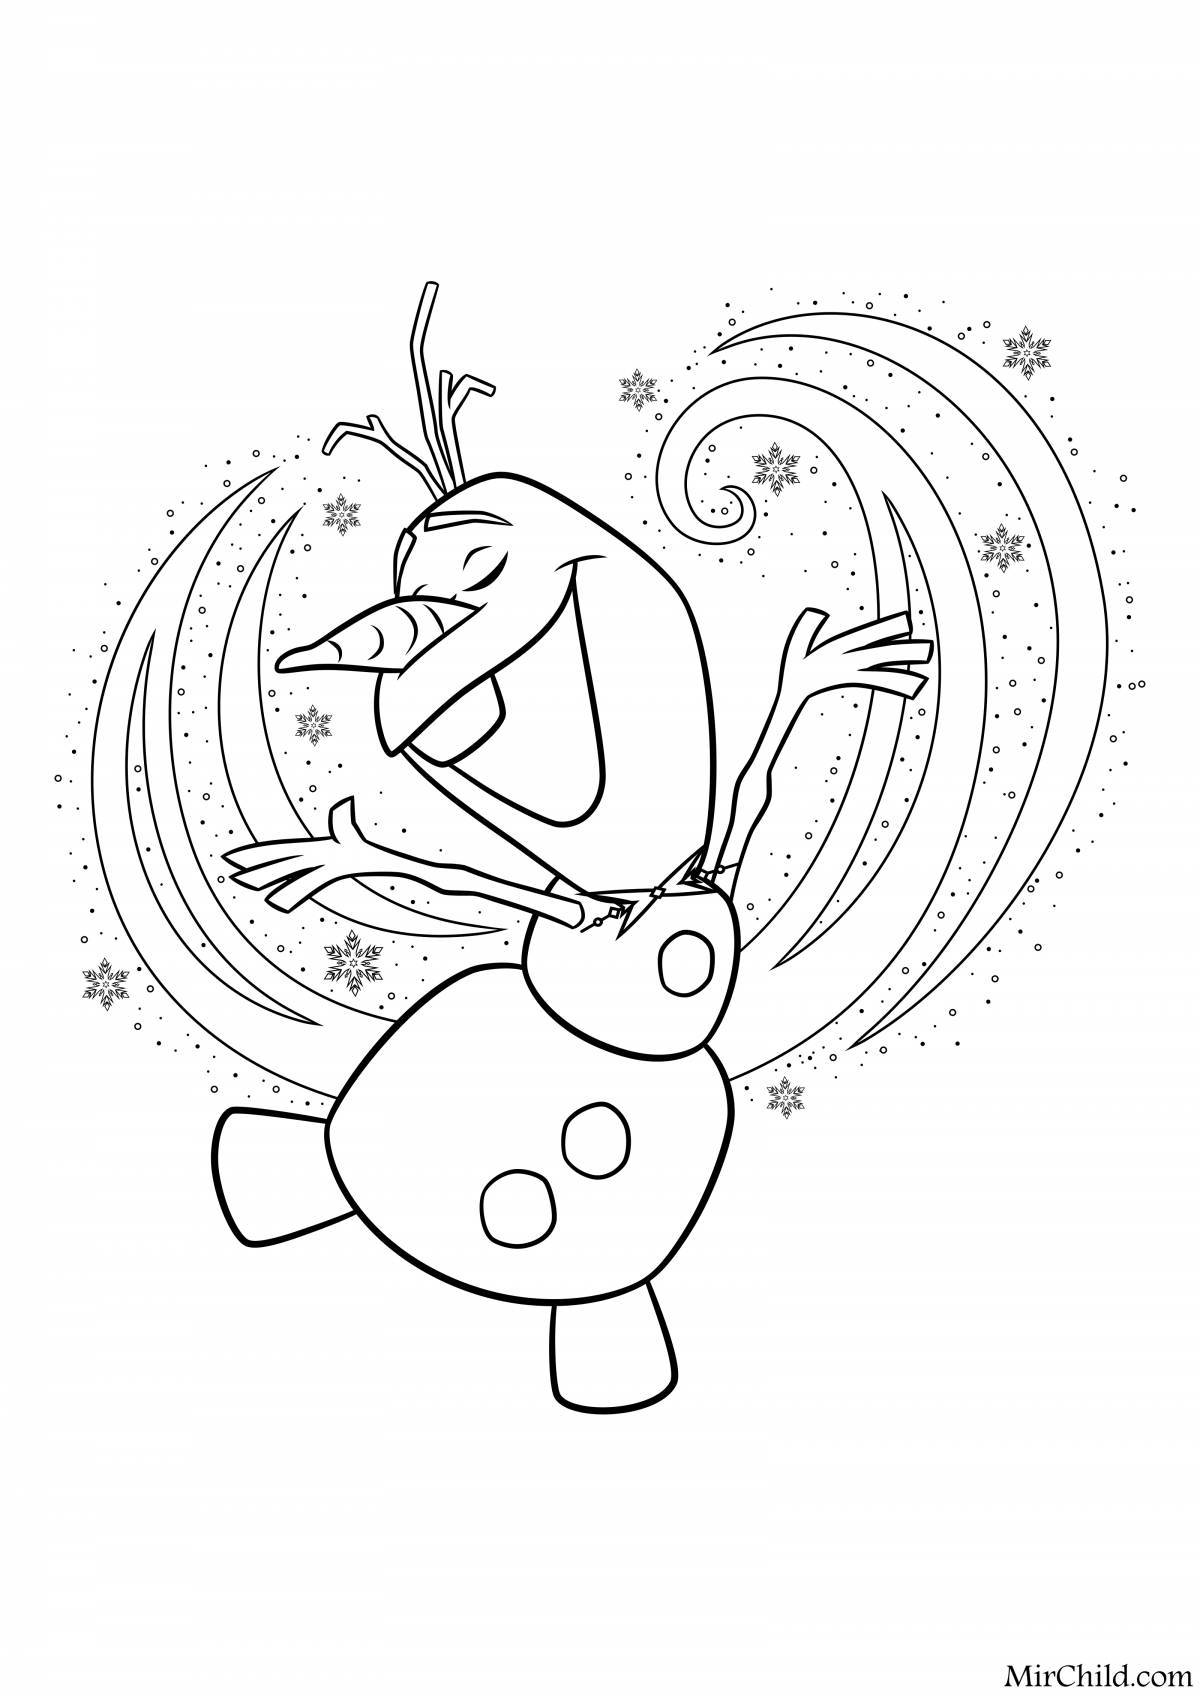 Olaf's amazing coloring book